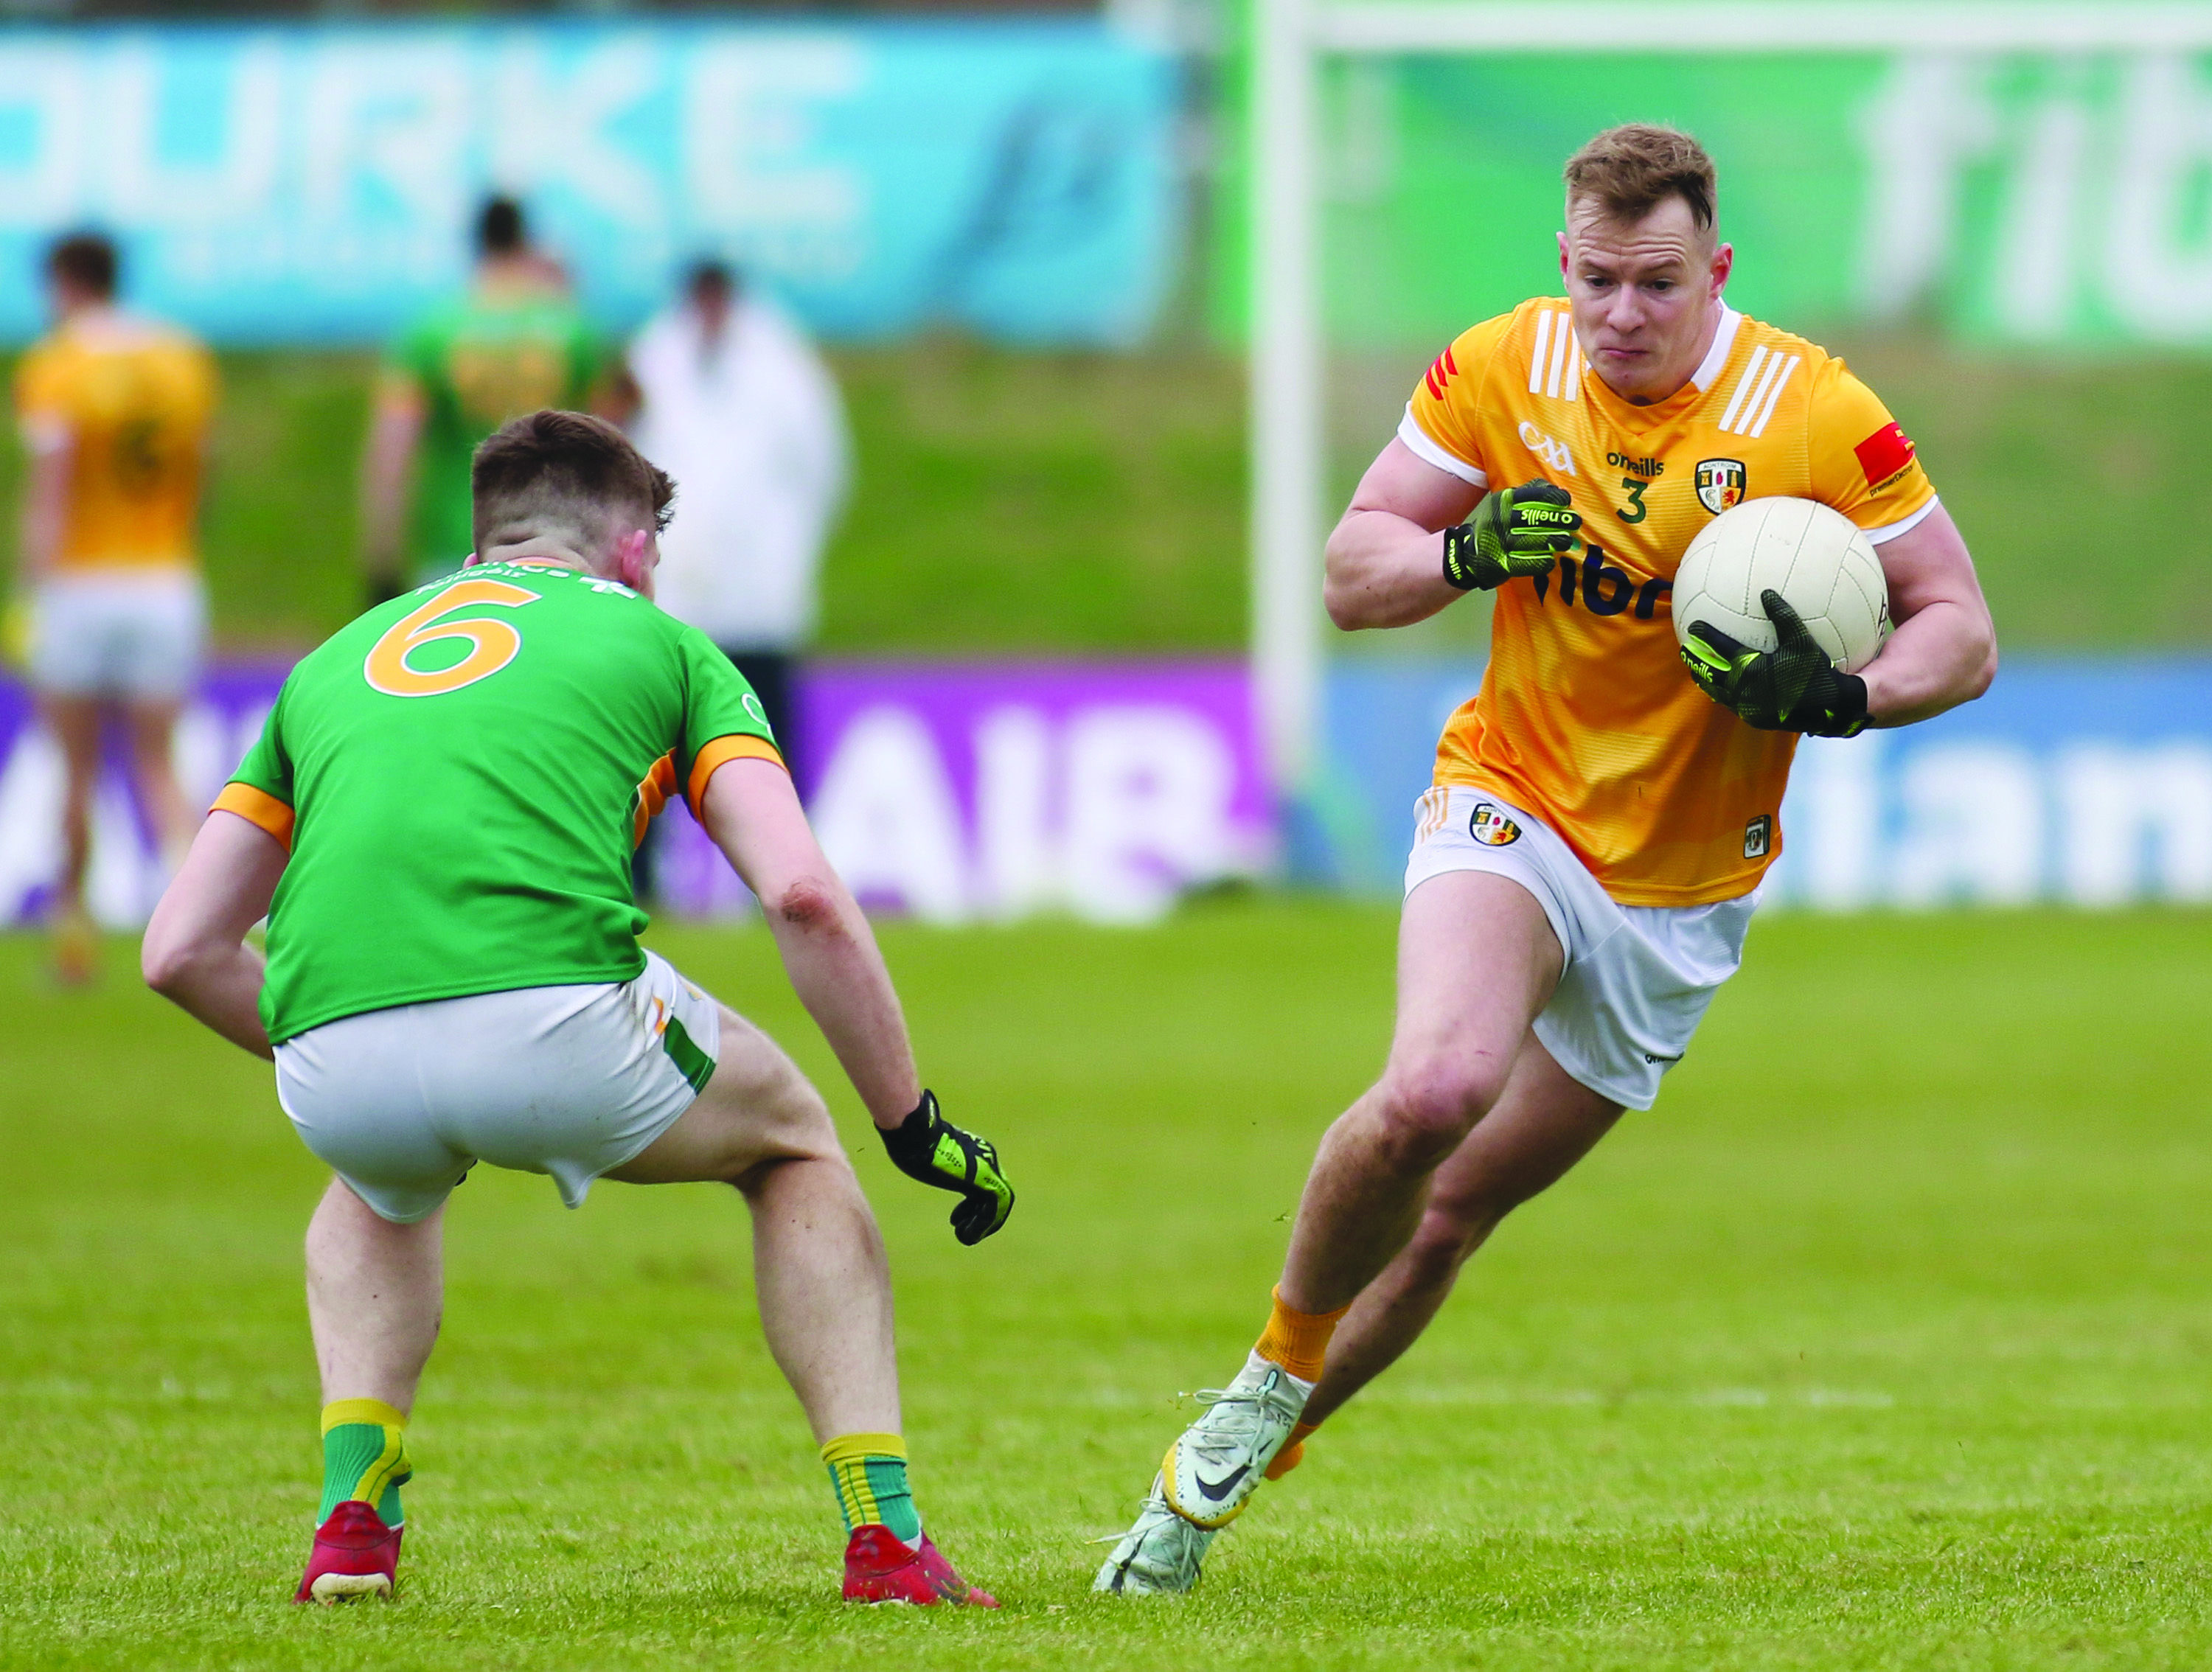 Team captain Peter Healy impressed against Leitrim and his influence will be key at Wexford Park on Saturday